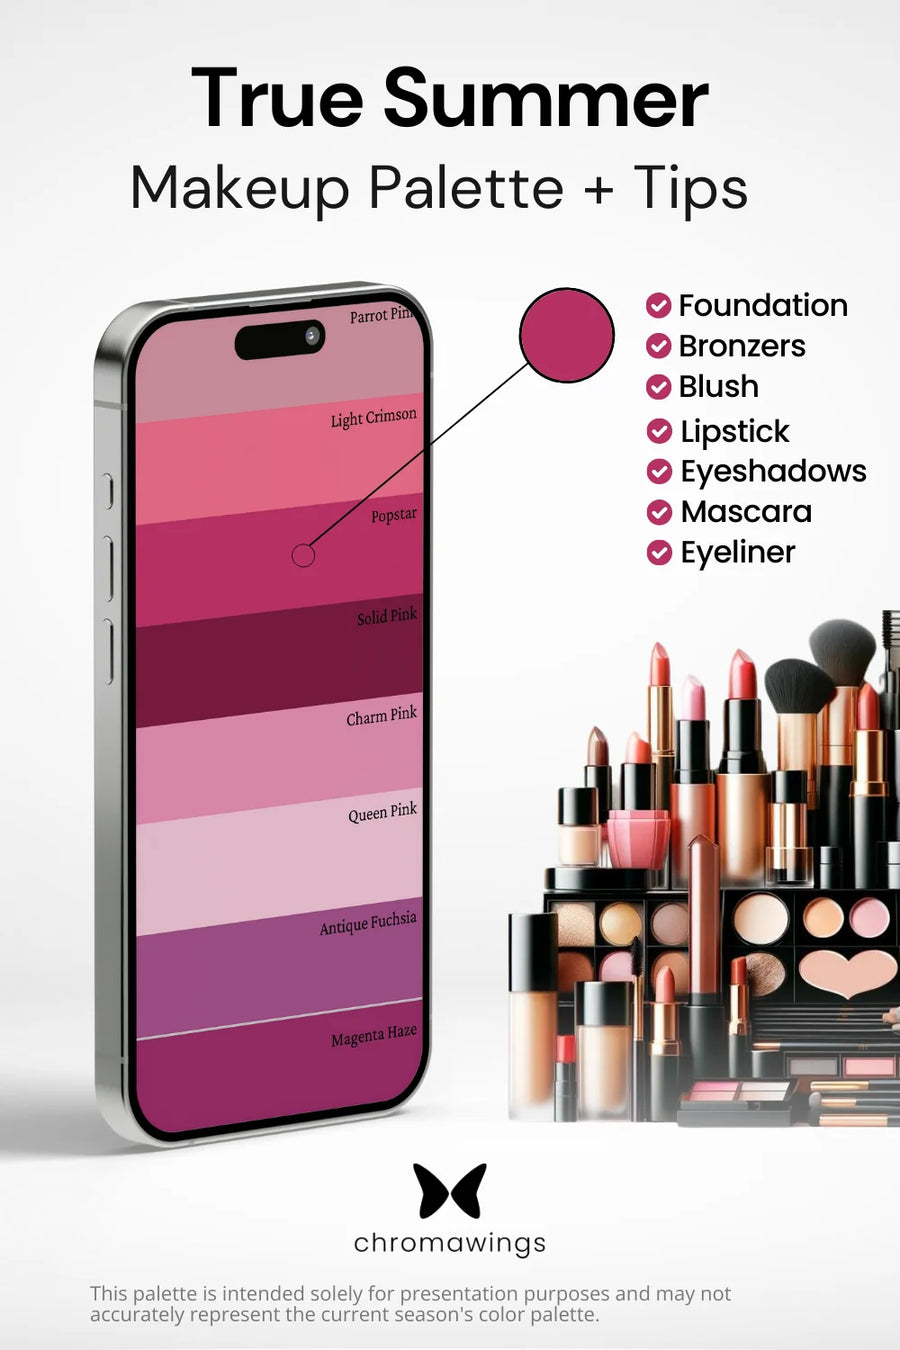 True Summer Makeup palette on phone, color pinpointed. Palette title, makeup types listed, shelf image.